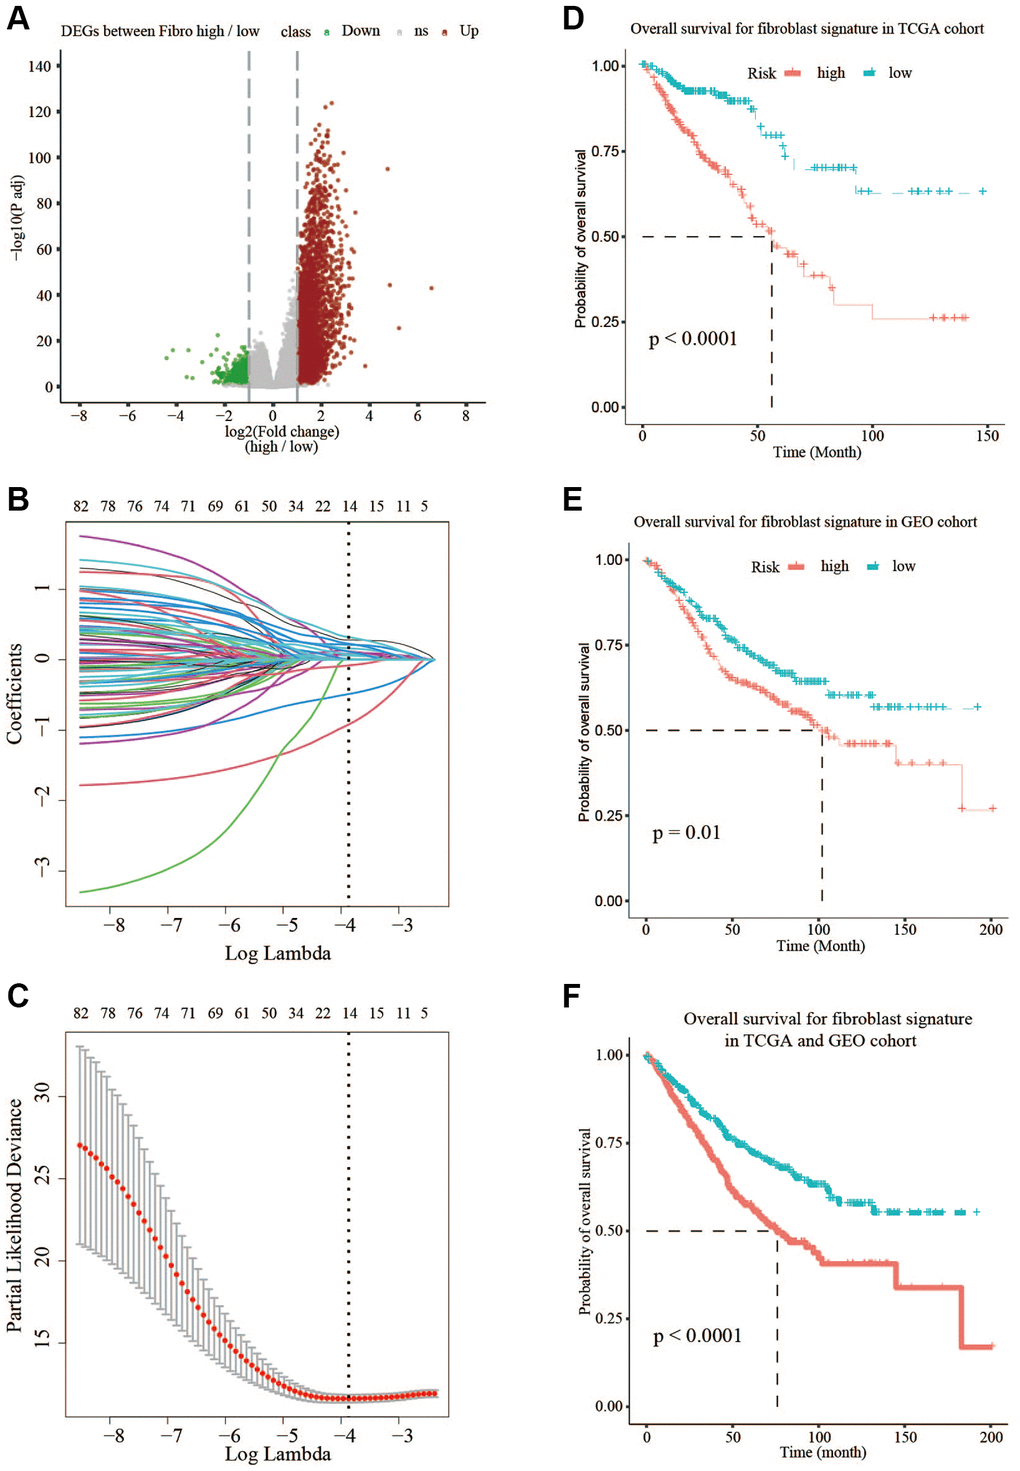 Prognostic signature based on 14 hub genes. (A) Differentially expressed genes in TCGA between low-fibroblast group and high-fibroblast group. (B, C) LASSO-COX analysis of prognostic genes. (D) The OS is shorter in the high-risk group than in the low-risk group in TCGA. (E) The OS is shorter in the high-risk group than in the low-risk group in GSE39582. (F) The OS is shorter in the high-risk group than in the low-risk group in TCGA and GSE39582.